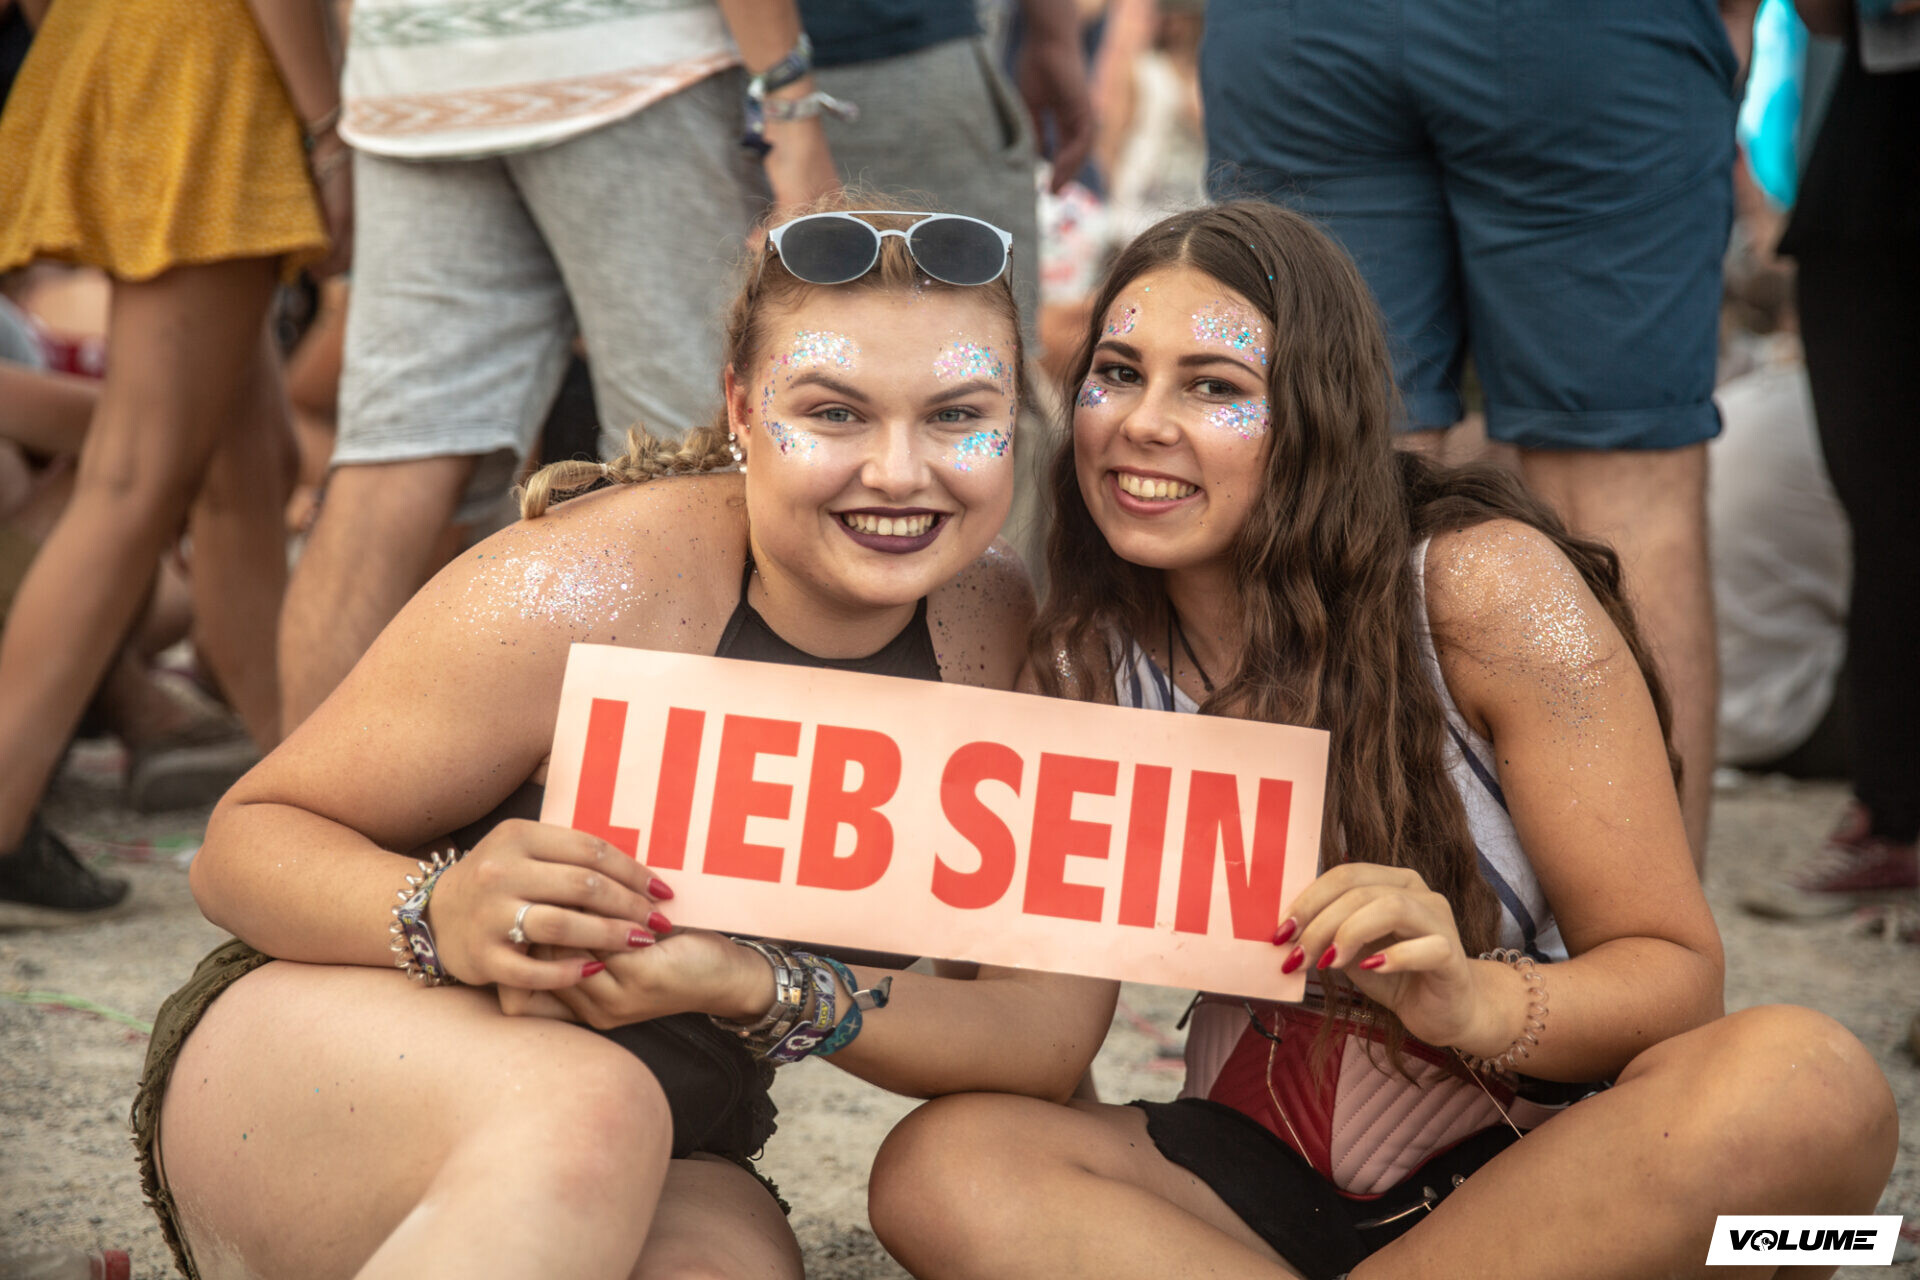 Die ultimativen Do’s and Dont’s auf Festivals